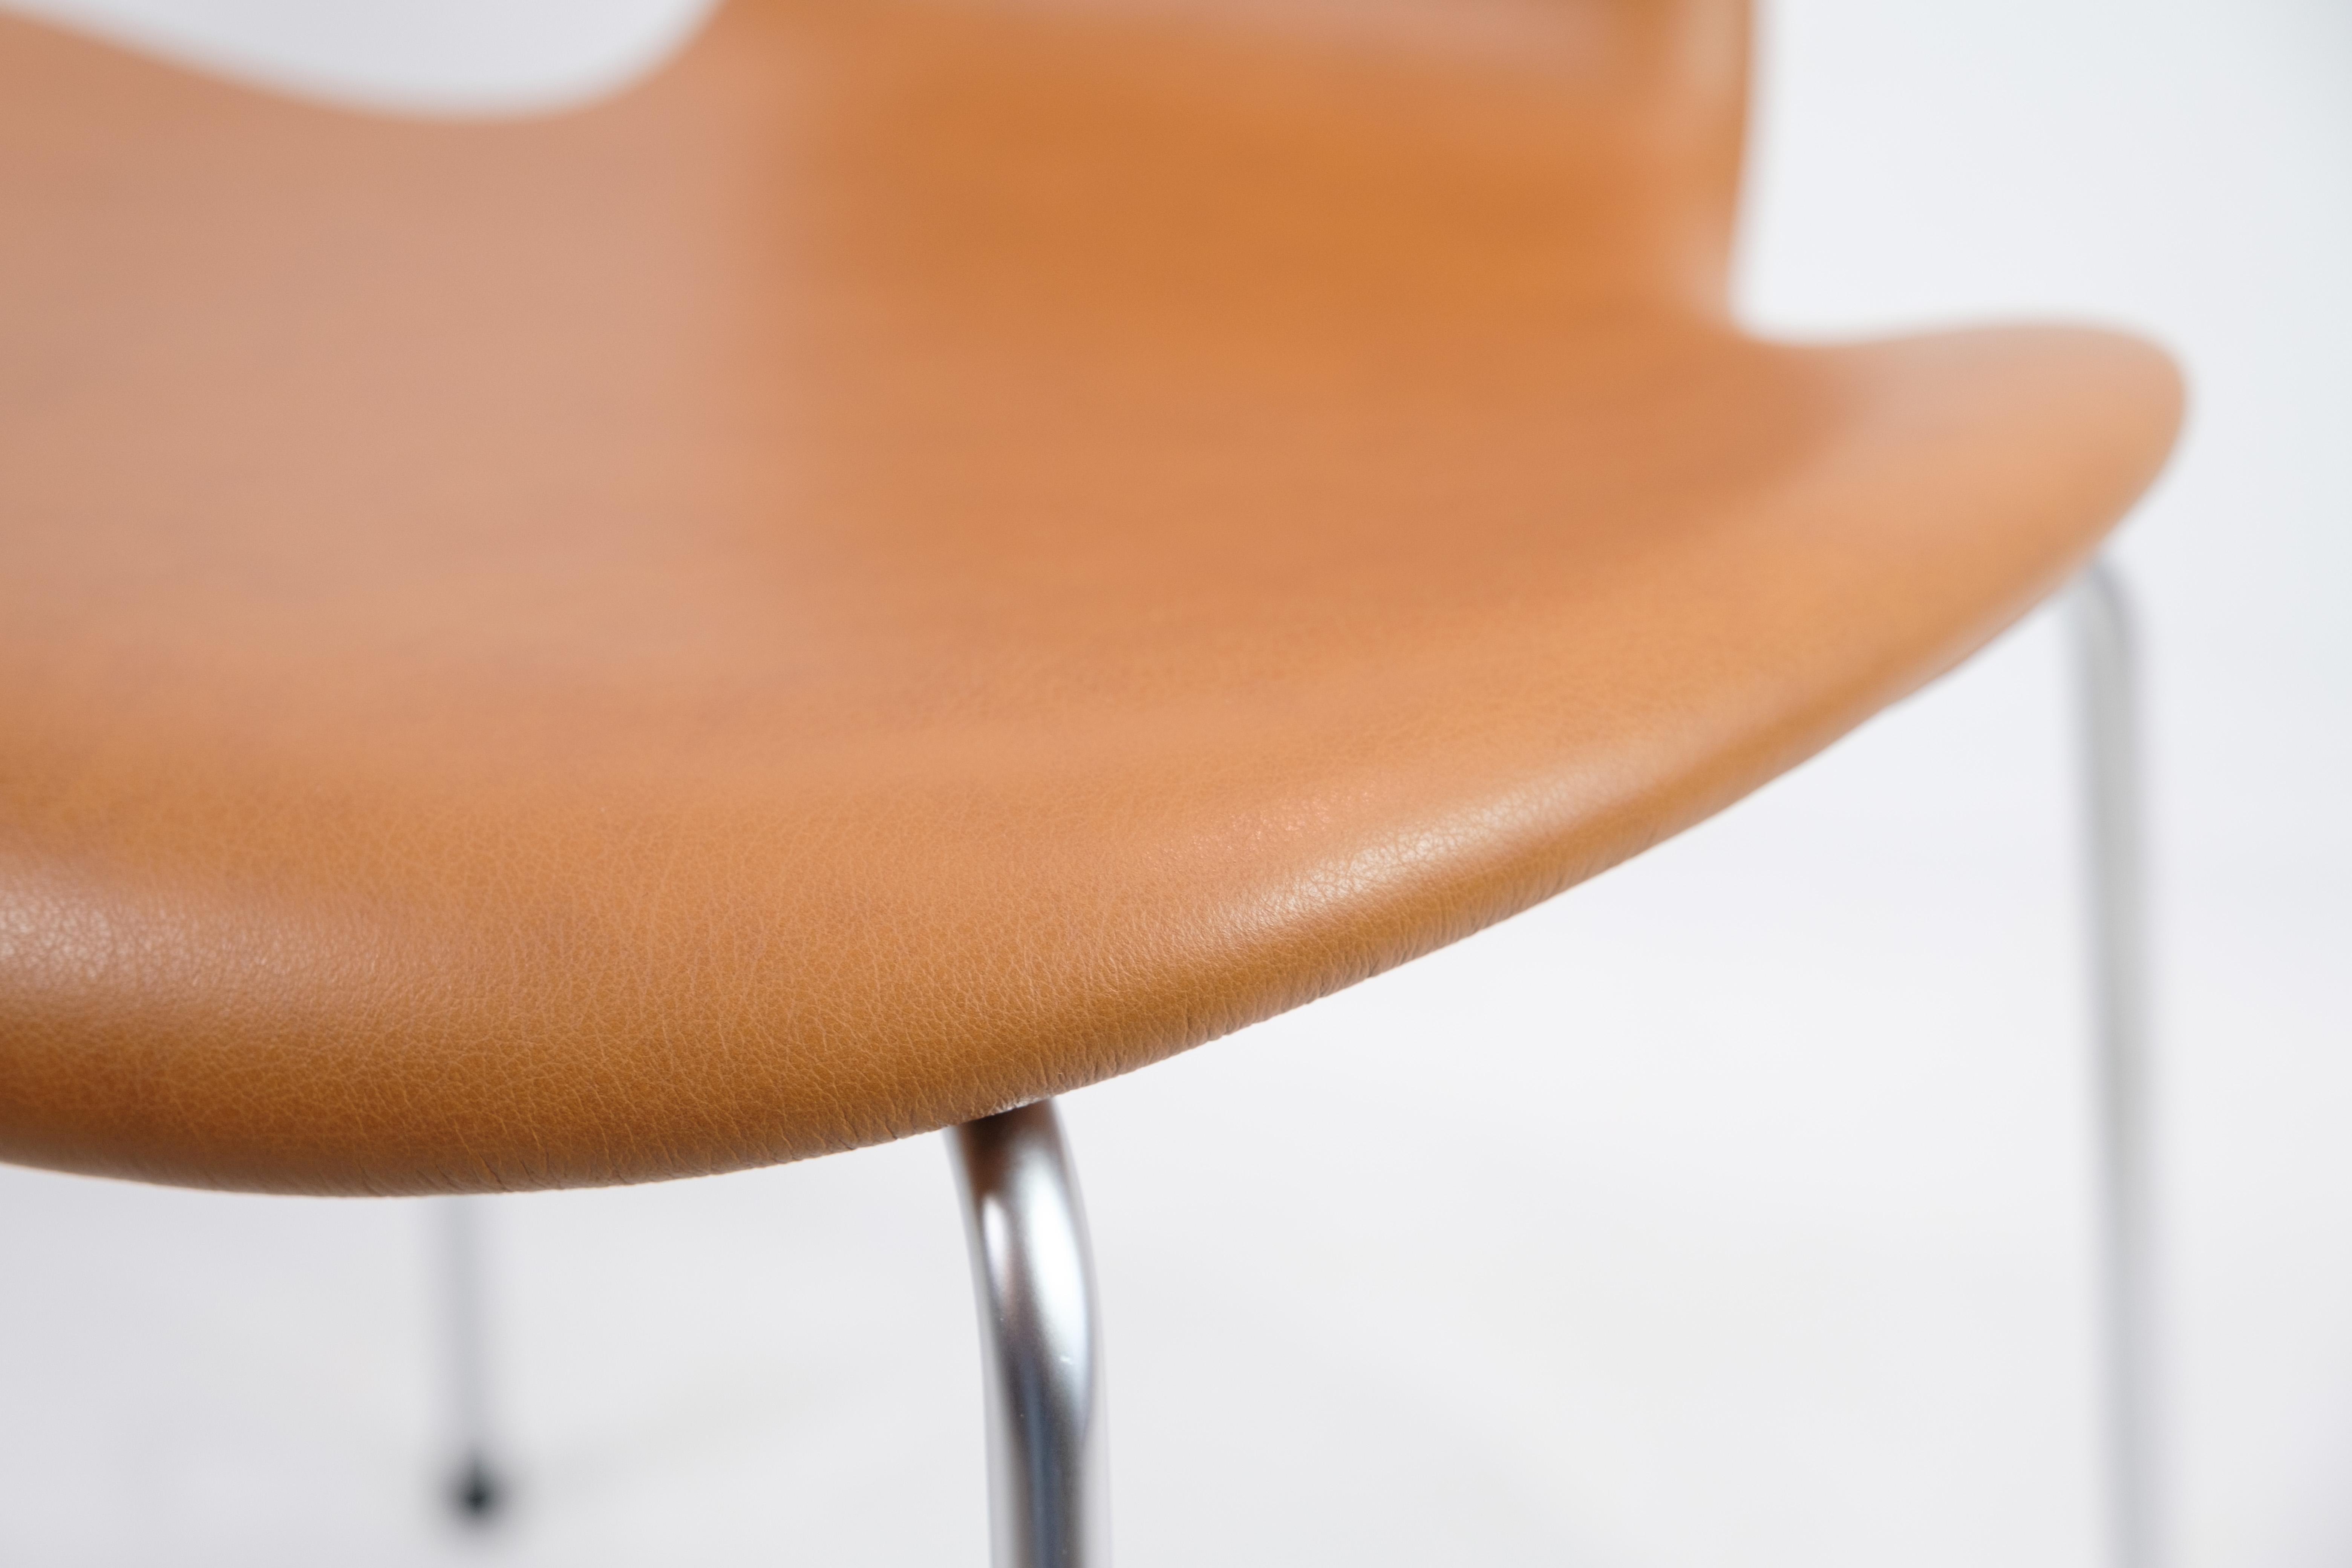 The Grand Prix chair, model 3130, is a classic chair designed by Danish architect and designer Arne Jacobsen in 1957. It is one of Jacobsen's most iconic designs and has become a symbol of modern Danish design.

The chair features a simple, yet